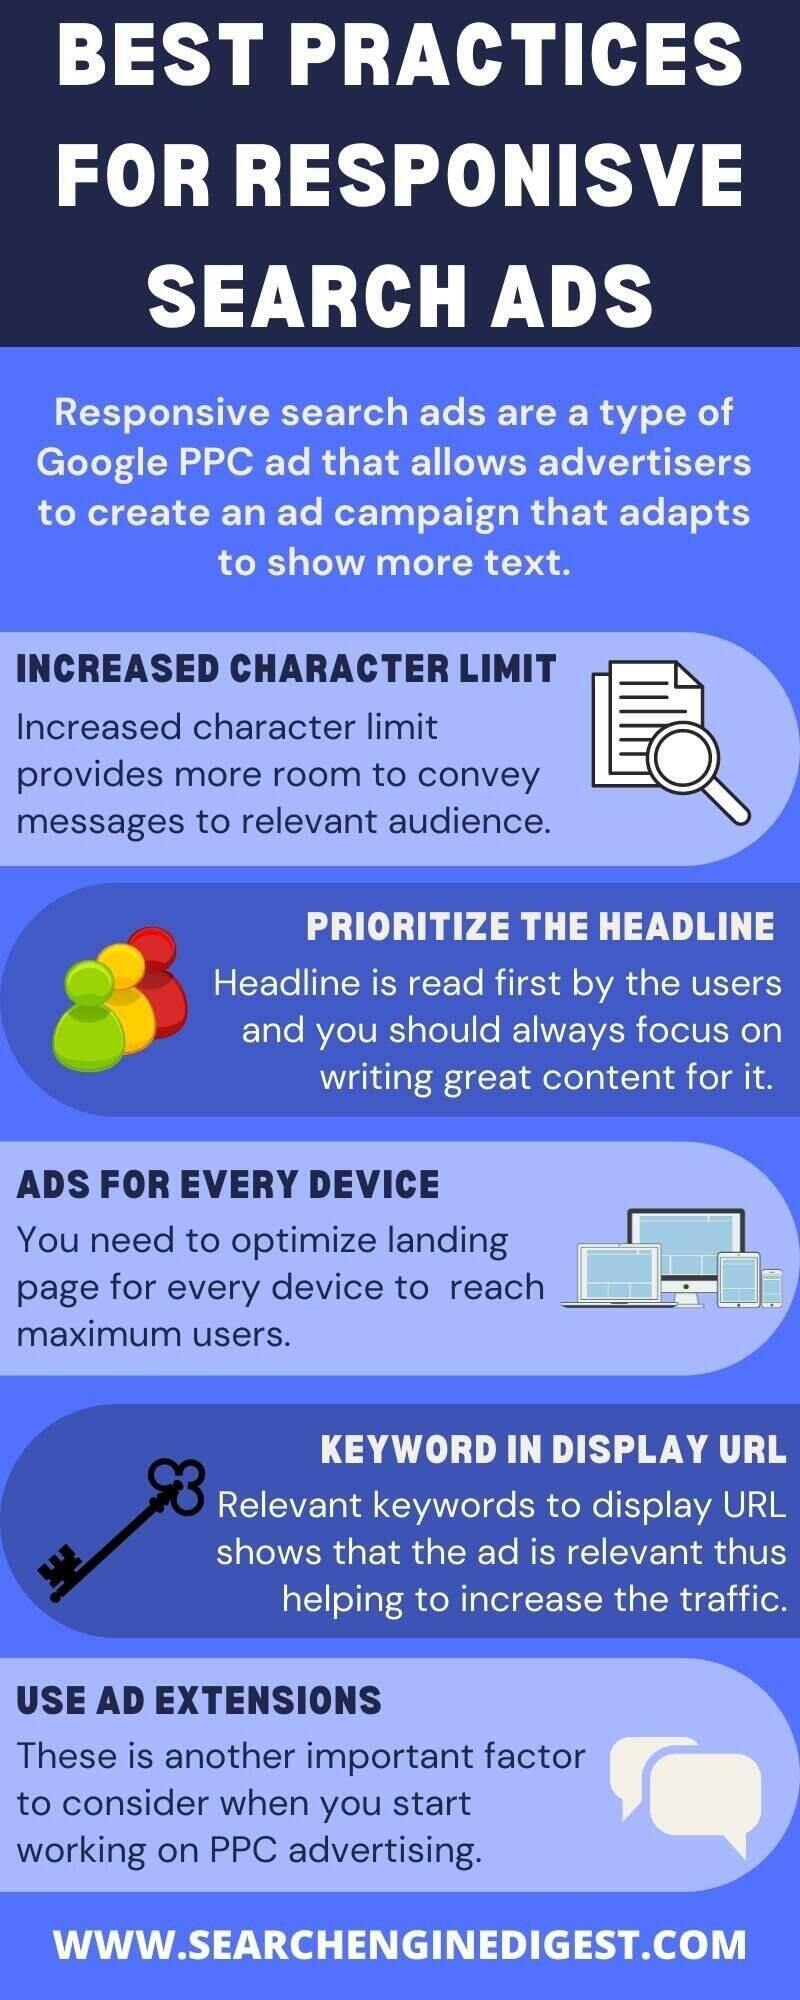 best practices for responsive search ads infographic